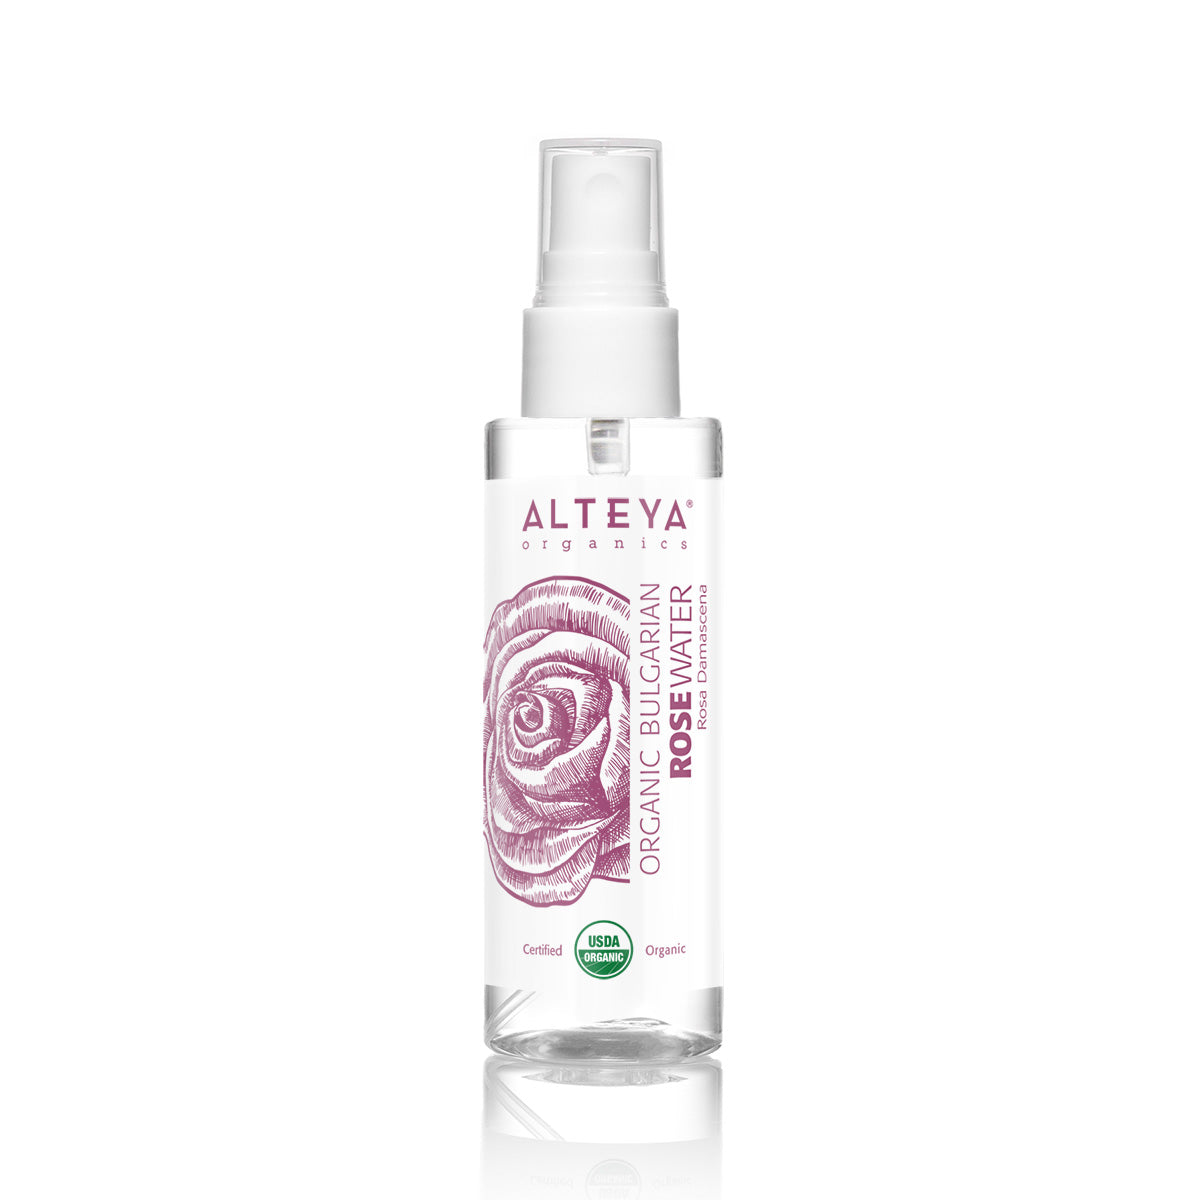 Our pure and Organic Rose Water helps tone, soften, and soothe skin, restoring its beauty and naturally fresh, youthful appearance. By delivering a healthy boost of hydration and essential micro-nutrients, it promotes dewy and more luminous complexion. Our Rose Water is known to refresh skin and support its moisture balance, smoothing out the appearance of fine lines and wrinkles for a more defined look. It can also be used to nourish and moisturize hair and prevent frizz.